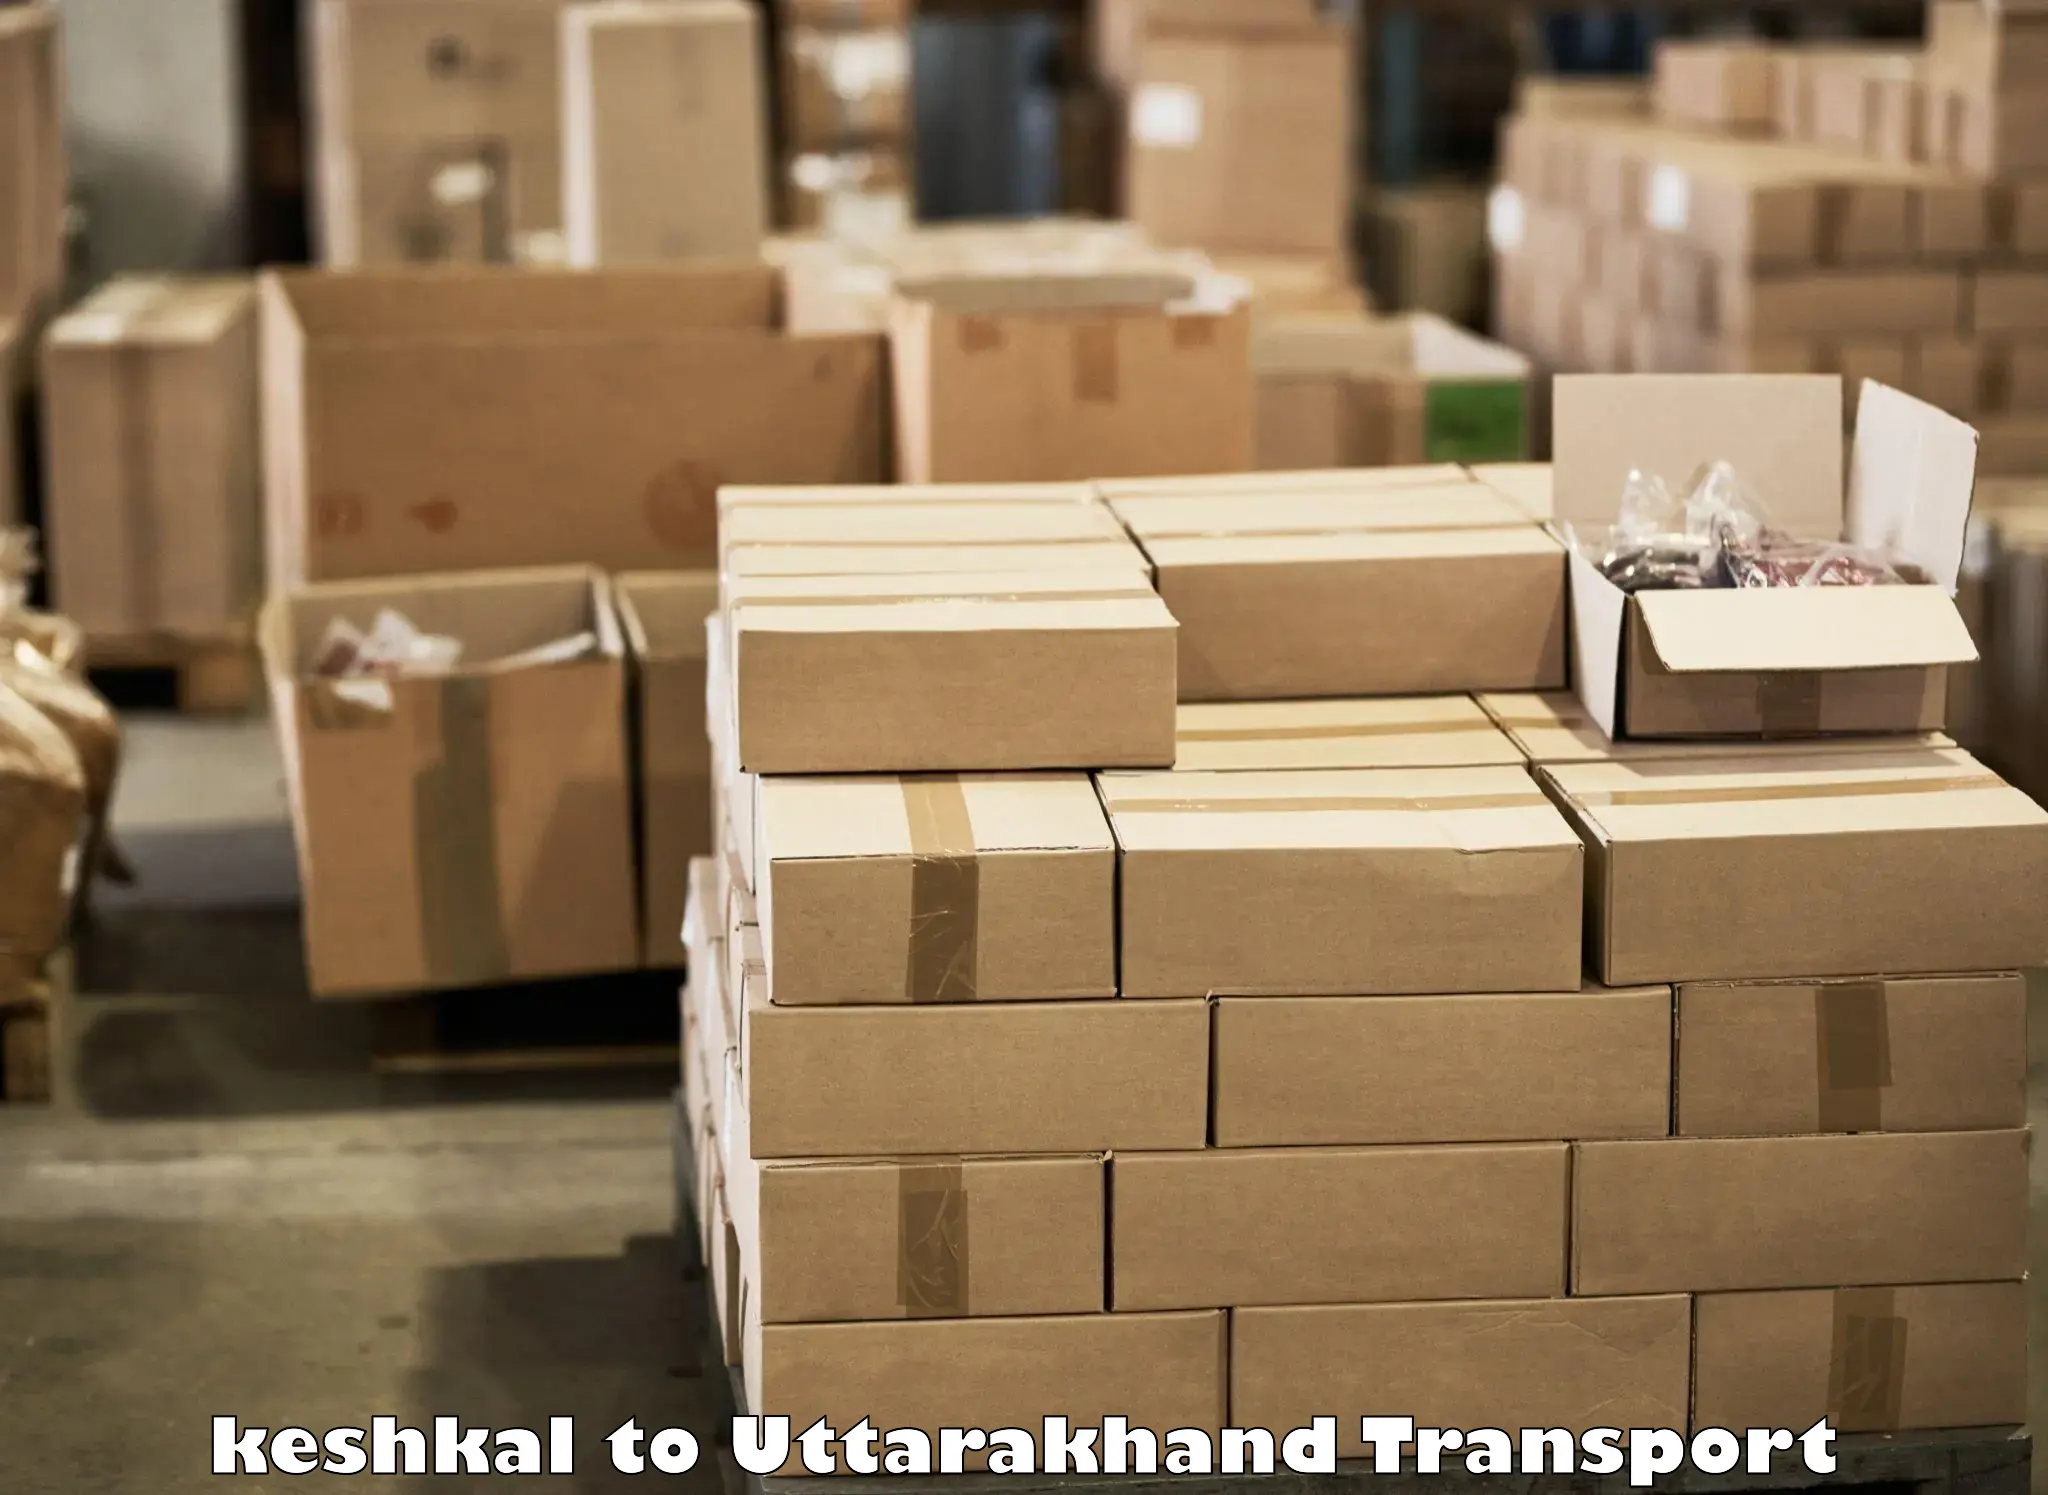 Container transport service keshkal to IIT Roorkee